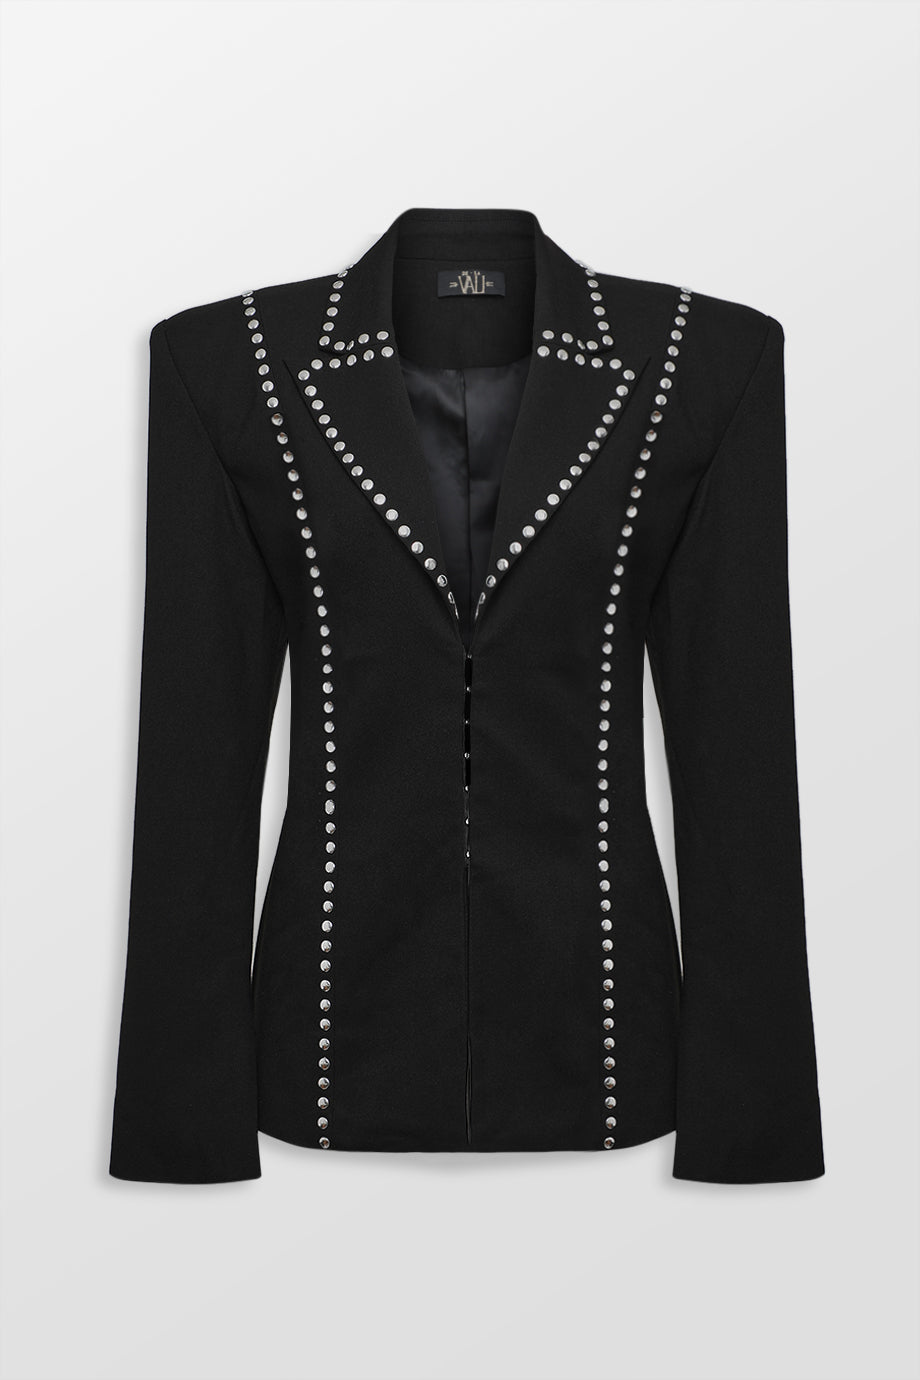 Cassius Studded Blazer With Shoulder Pads